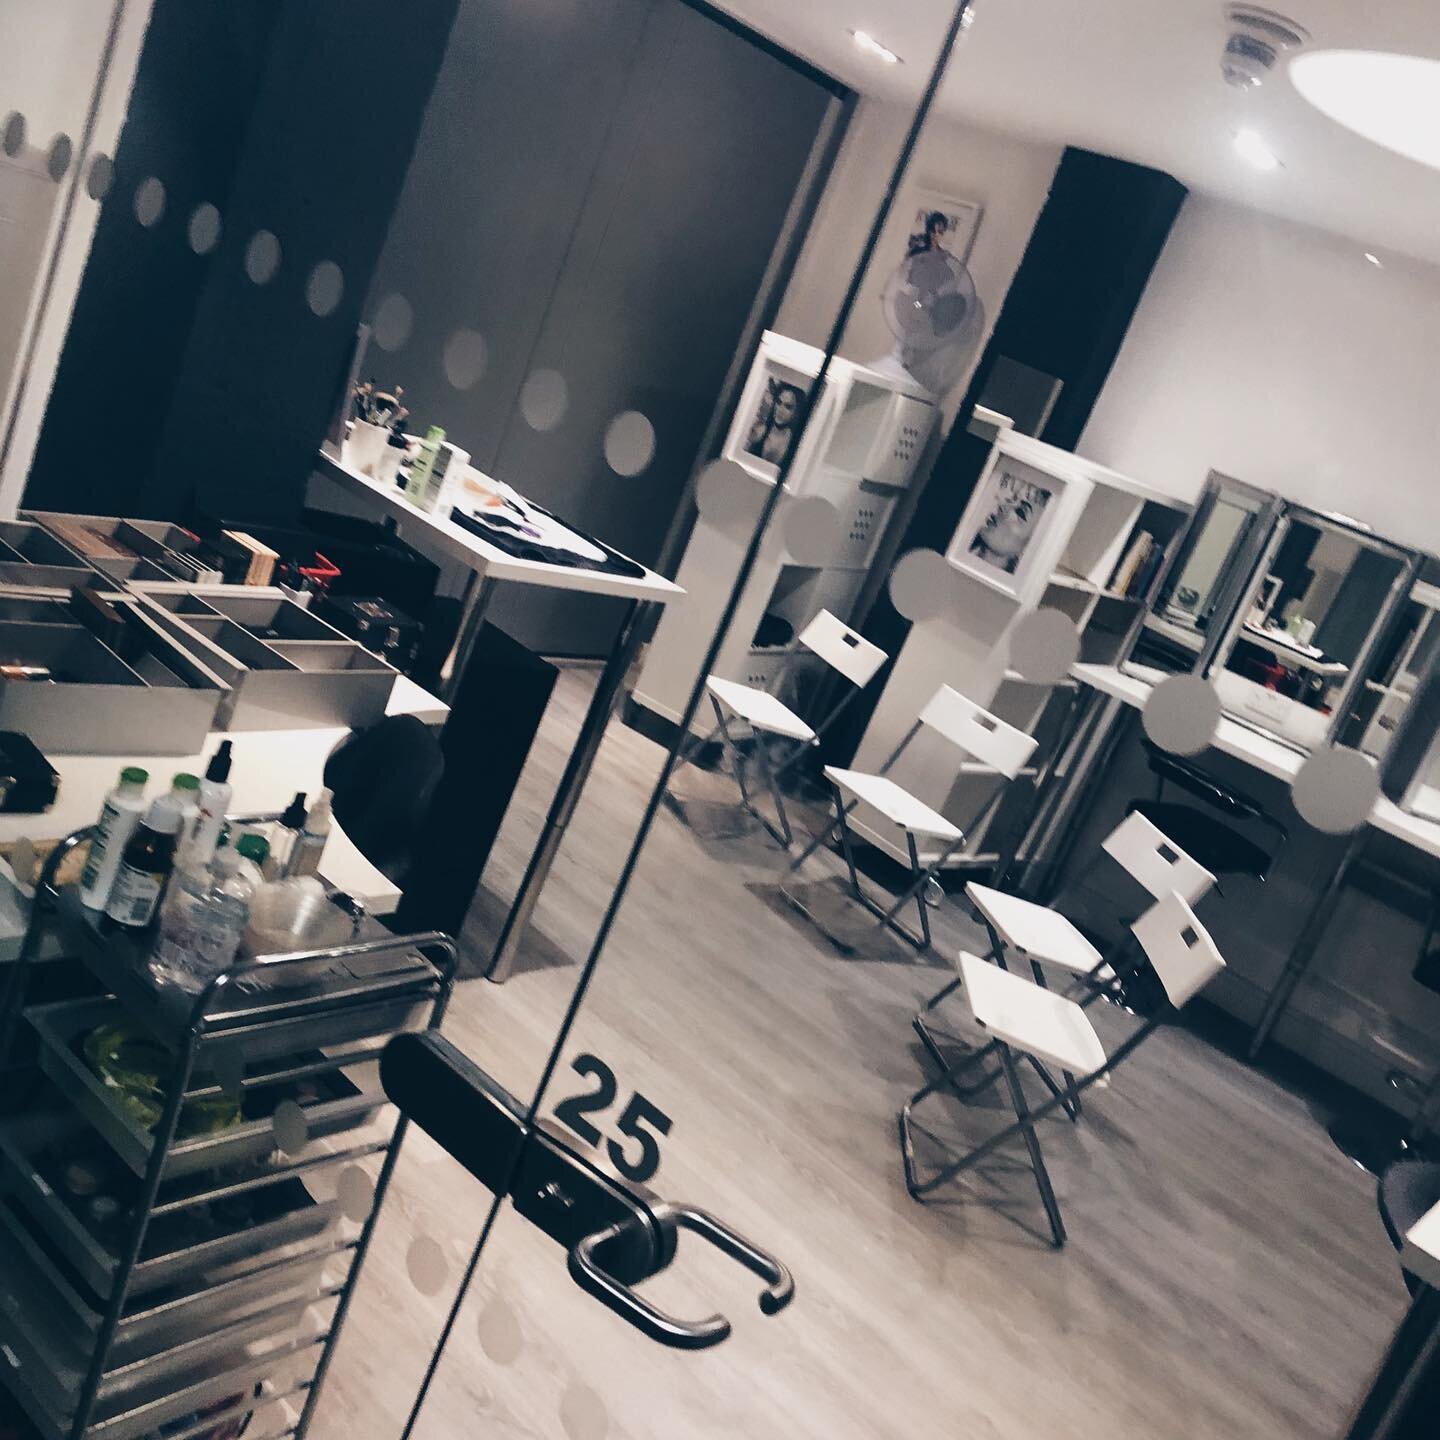 𝕆𝕦𝕣  lovely studio ready for short course tomorrow ... Are you ready to join our Ella community ?✨✨✨#makeupcollege
⠀⠀⠀⠀⠀⠀⠀⠀⠀
⠀⠀⠀⠀⠀⠀⠀⠀⠀
⠀⠀⠀⠀⠀⠀⠀⠀⠀
⠀⠀⠀⠀⠀⠀⠀⠀⠀
⠀⠀⠀⠀⠀⠀⠀⠀⠀
⠀⠀⠀⠀⠀⠀⠀⠀⠀
⠀⠀⠀⠀⠀⠀⠀⠀⠀
⠀⠀⠀⠀⠀⠀⠀⠀⠀
⠀⠀⠀⠀⠀⠀⠀⠀⠀
⠀⠀⠀⠀⠀⠀⠀⠀⠀
#makeupliverpool #makeupartistli